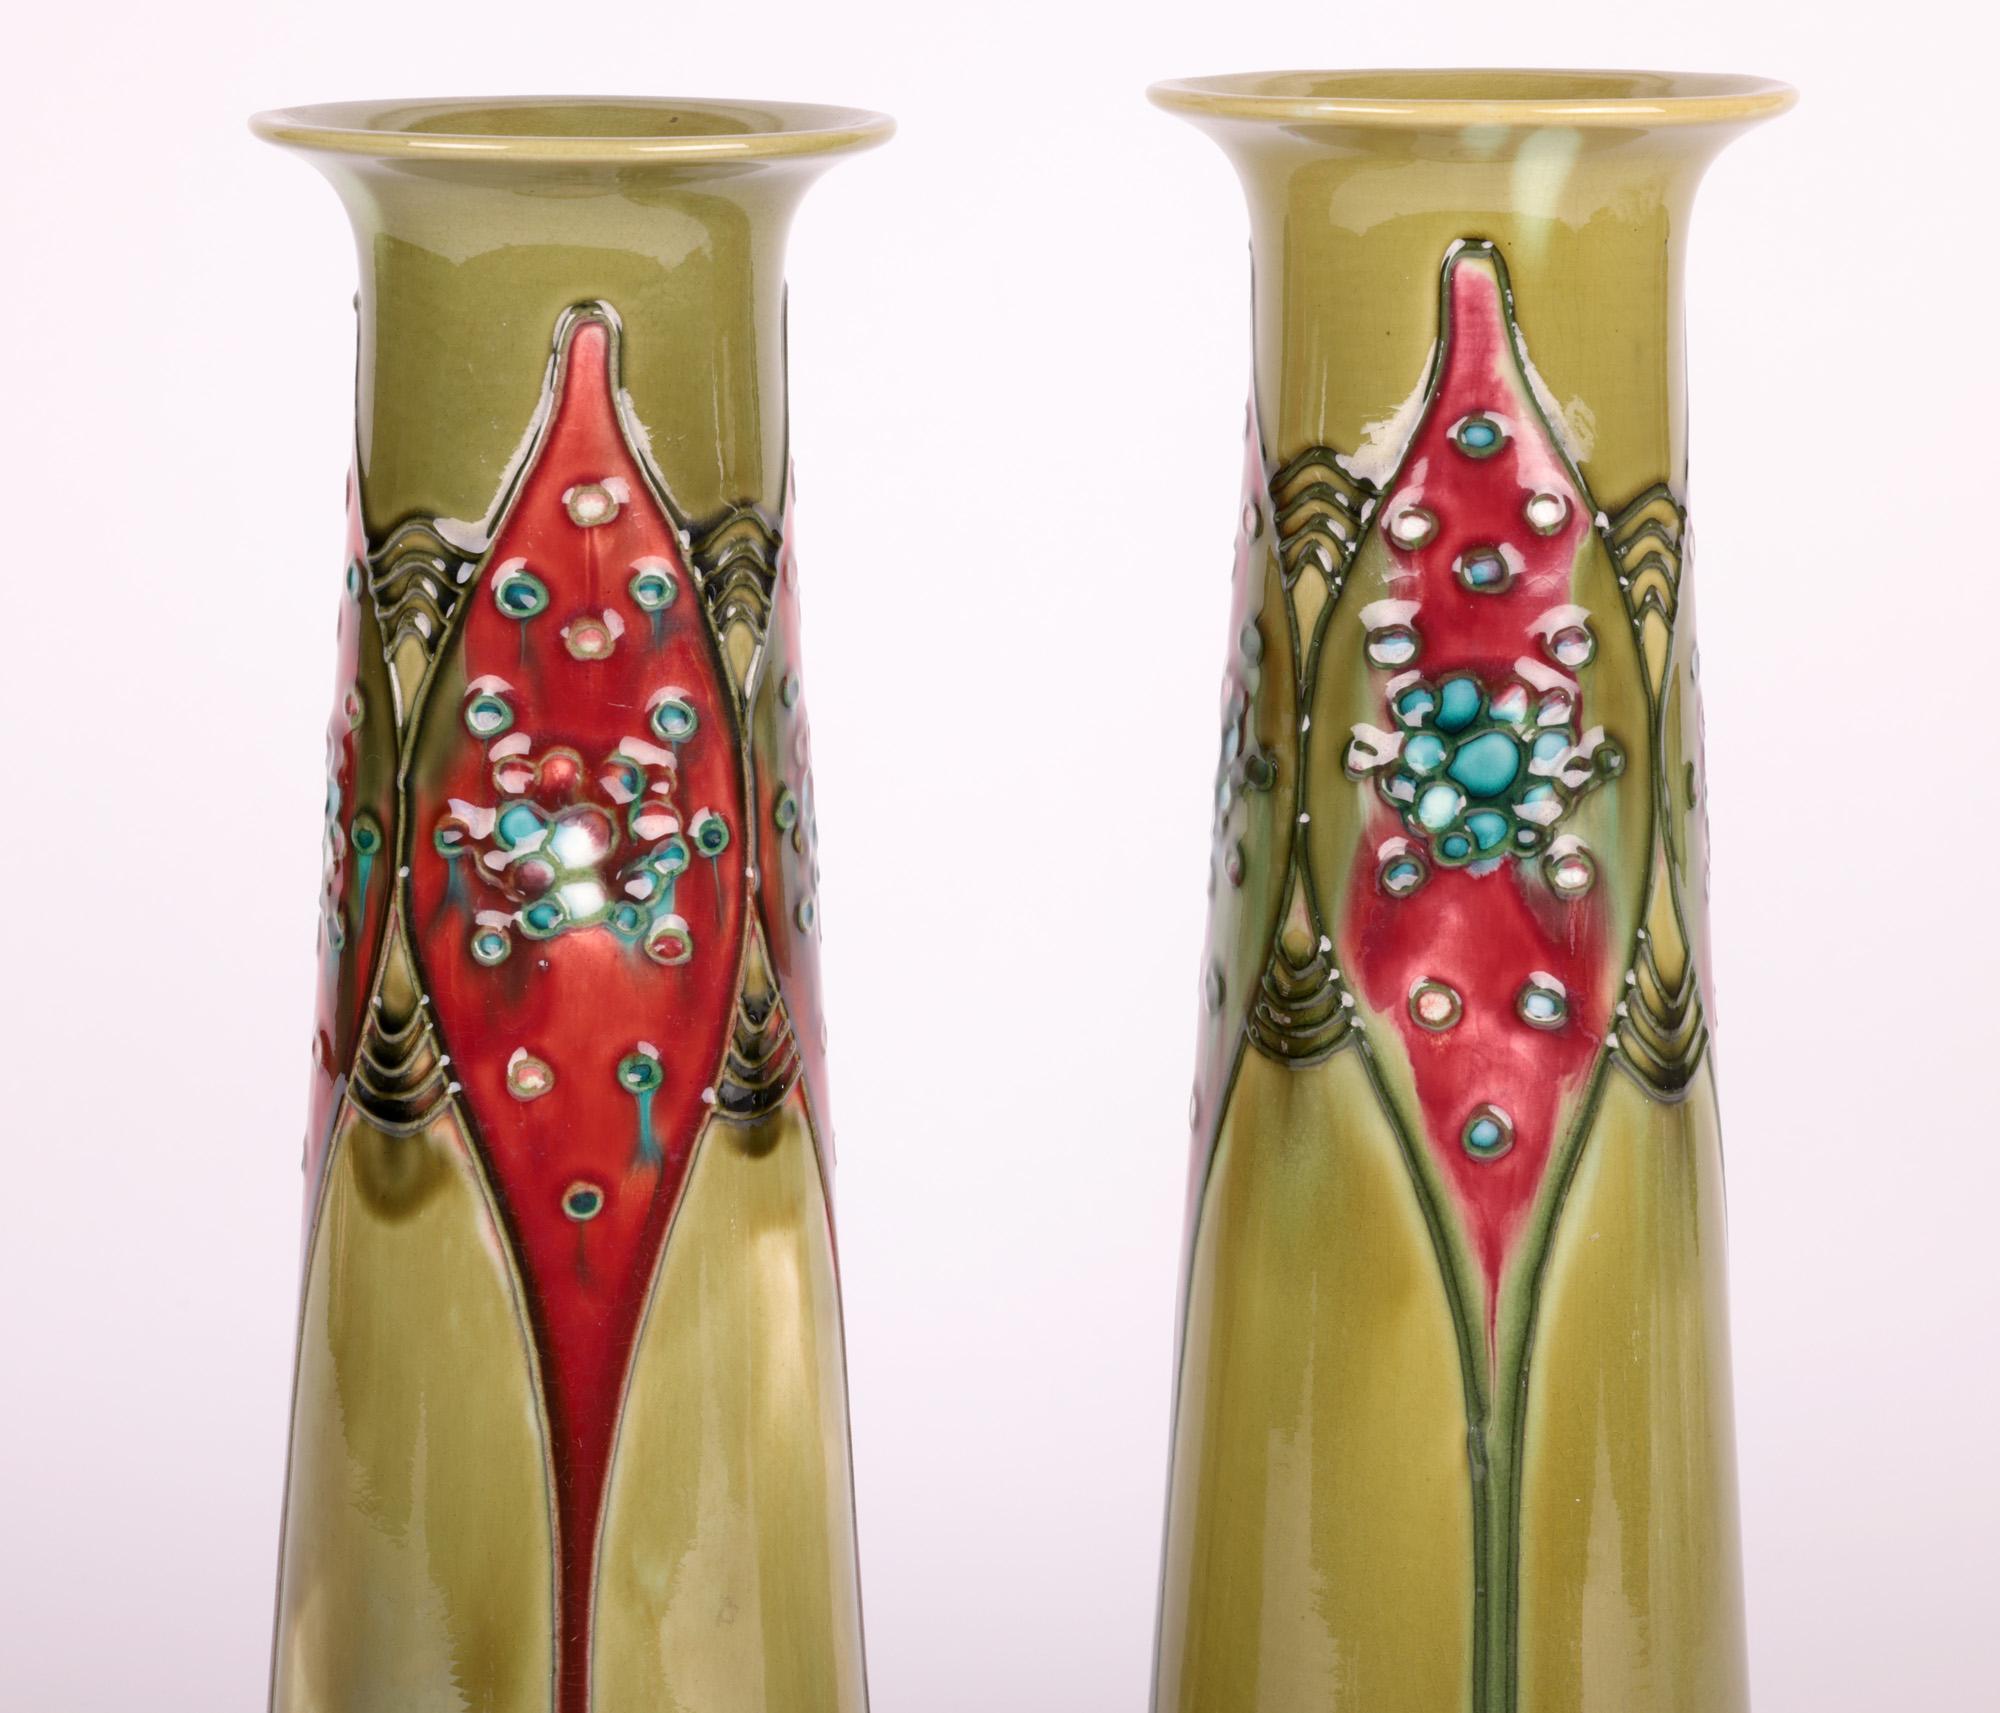 A very stylish and scarce pair Minton Secessionist Art Nouveau tube lined art pottery vases dating from around 1900. The pottery vases stand on a wide round stepped foot and are of tall tapering cylindrical shape with a round trumpet shape rim. The